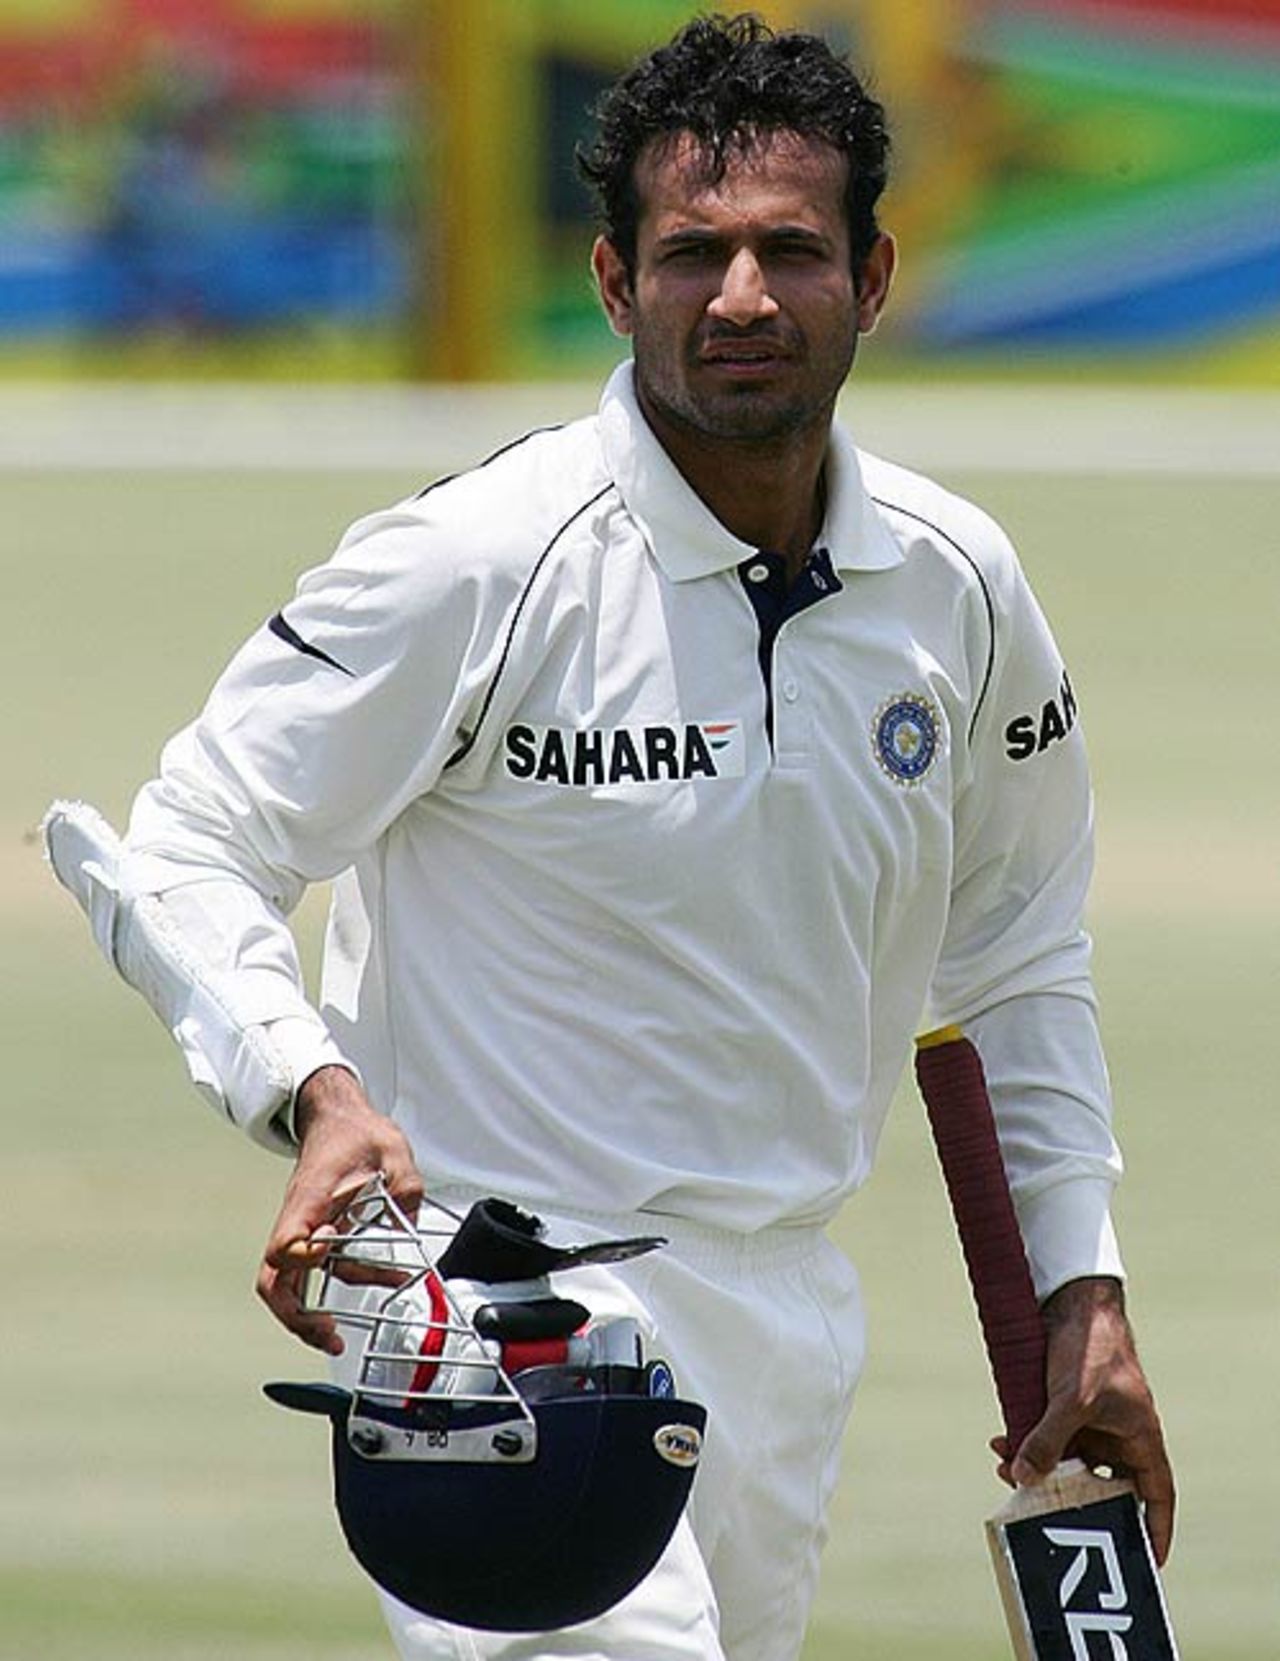 Irfan Pathan walks back after another impressive performance with the bat, Rest of South Africa v Indians, Potchefstroom, 3rd day, December 9, 2006